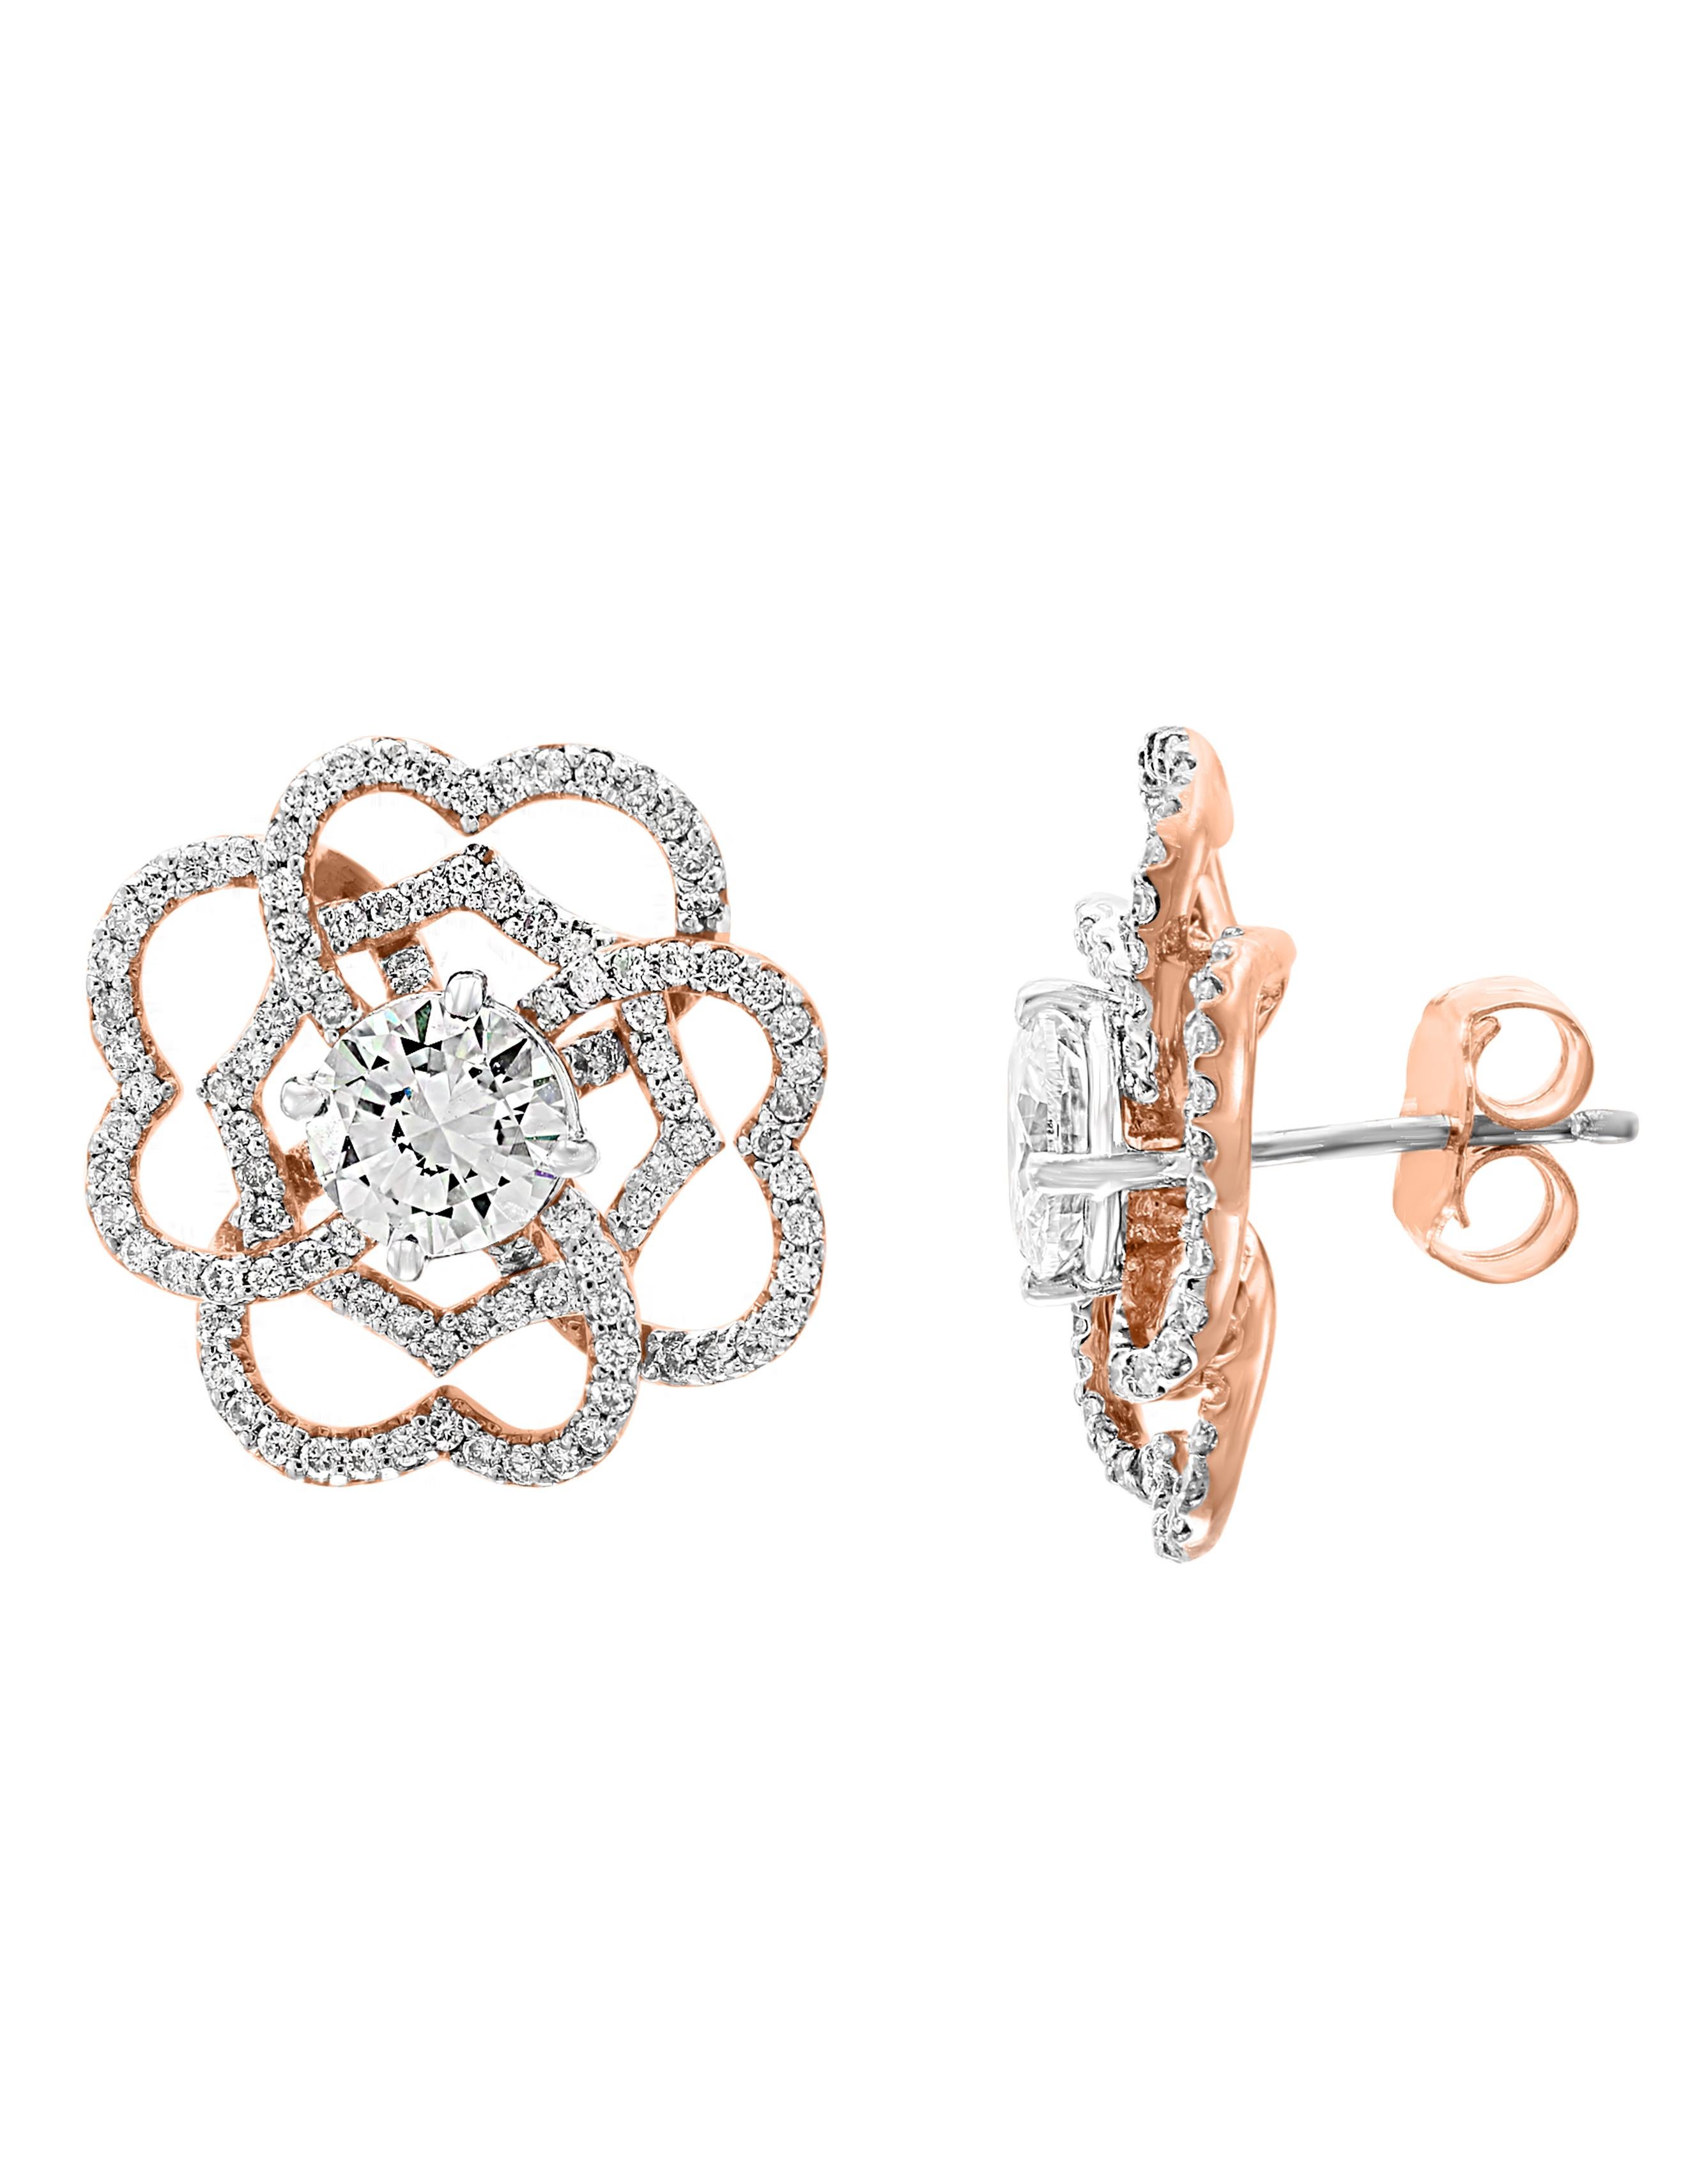 A fabulous pair of earrings with an enormous amount of look and sparkle!
almost 1  carat In the center VS2 clarity diamonds set in solid 14 karat Rose  gold  with post backs
Cluster earrings, featuring a center 1 ct  round  diamond  surrounded by 